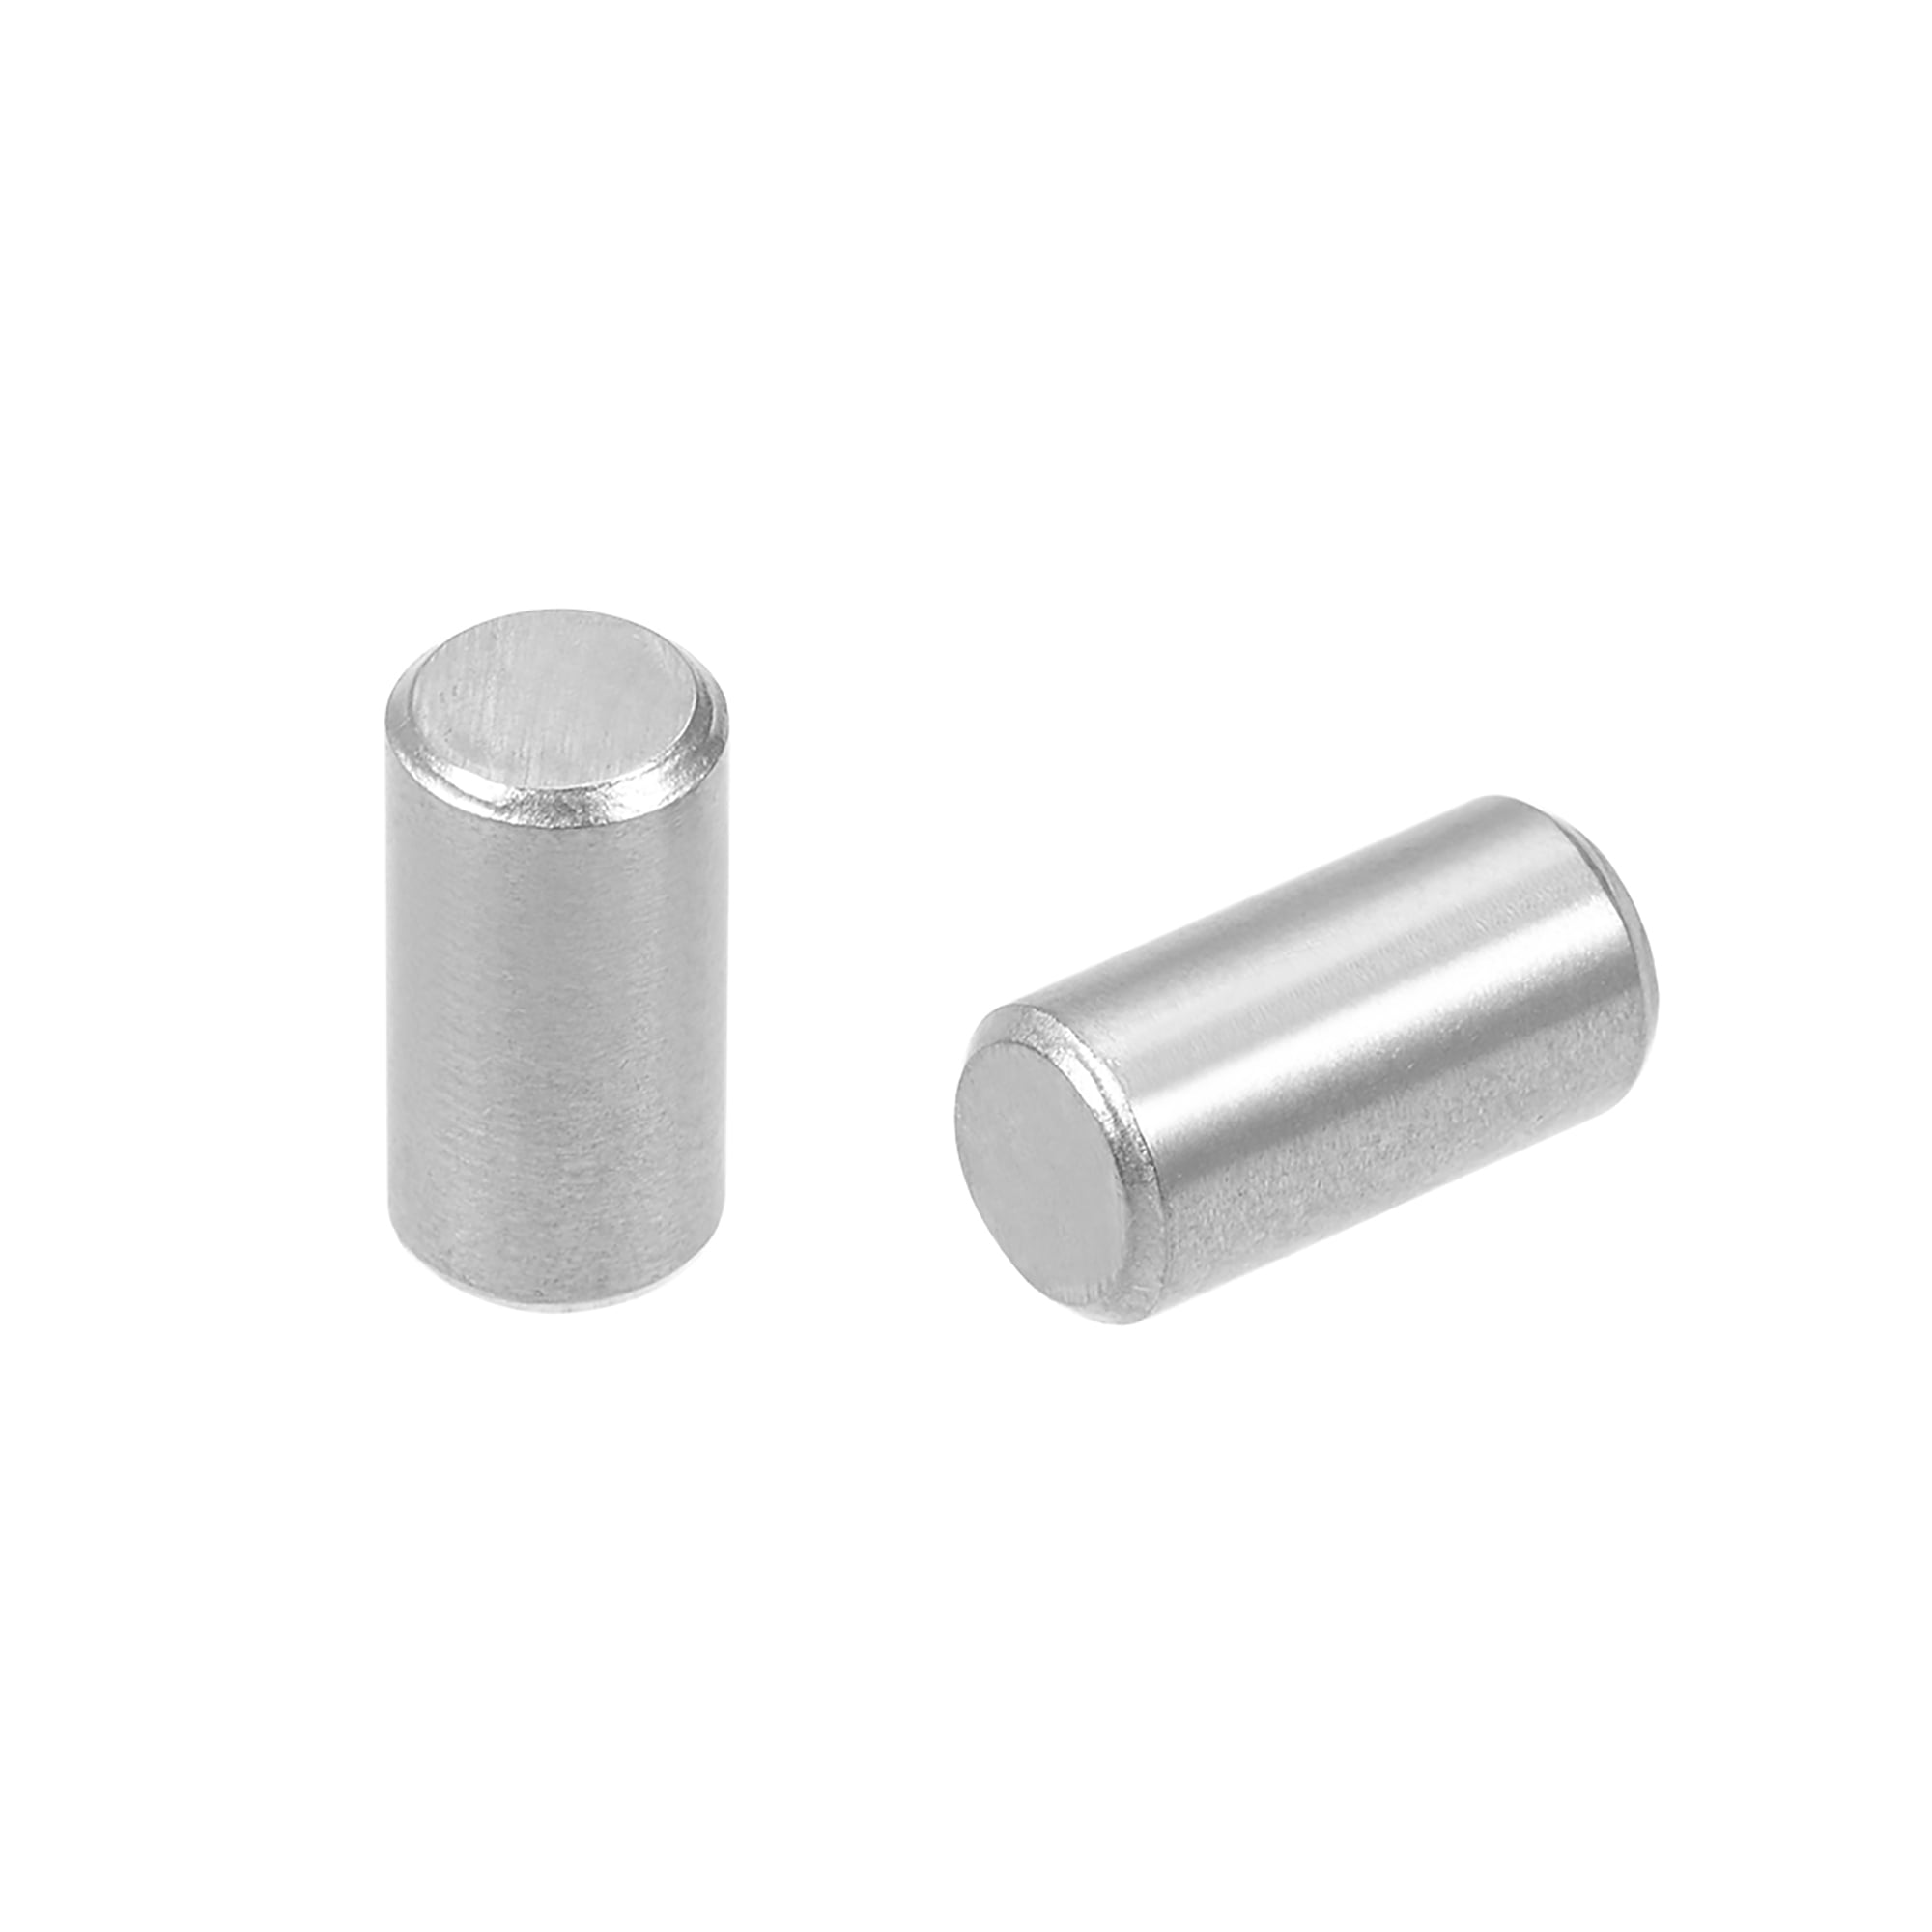 uxcell 15Pcs 6mm X 30mm Dowel Pin 304 Stainless Steel Cylindrical Shelf Support Pin Fasten Elements Silver Tone 